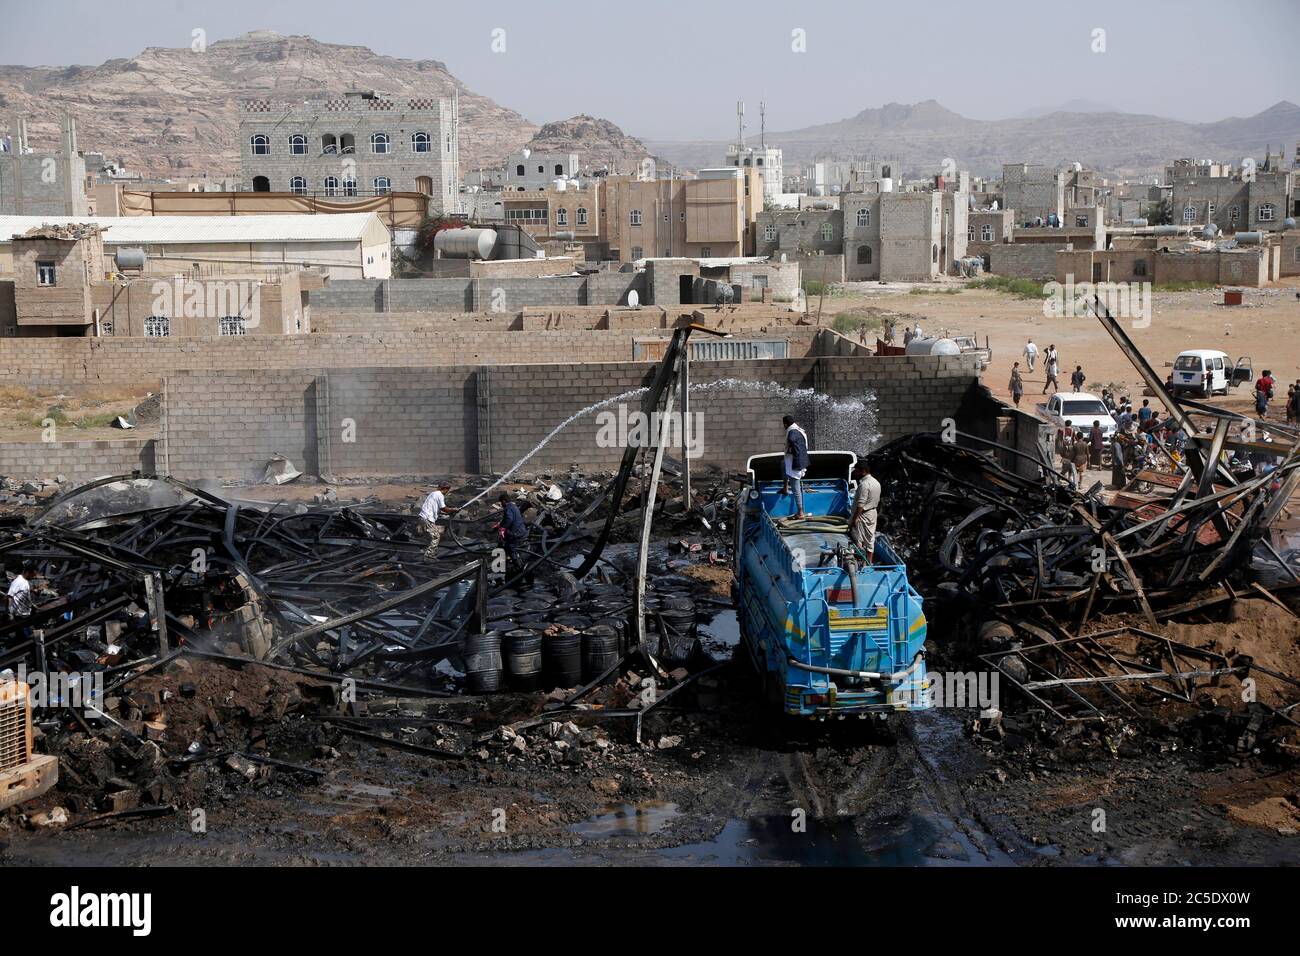 Sanaa, Yemen. 2nd July, 2020. People try to extinguish a fire following airstrikes on a warehouse in Sanaa, Yemen, on July 2, 2020. The Saudi-led coalition on Wednesday launched a series of airstrikes on the Yemeni capital Sanaa, which is under Houthi control, the Houthi-run al-Masirah TV reported. Credit: Mohammed Mohammed/Xinhua/Alamy Live News Stock Photo